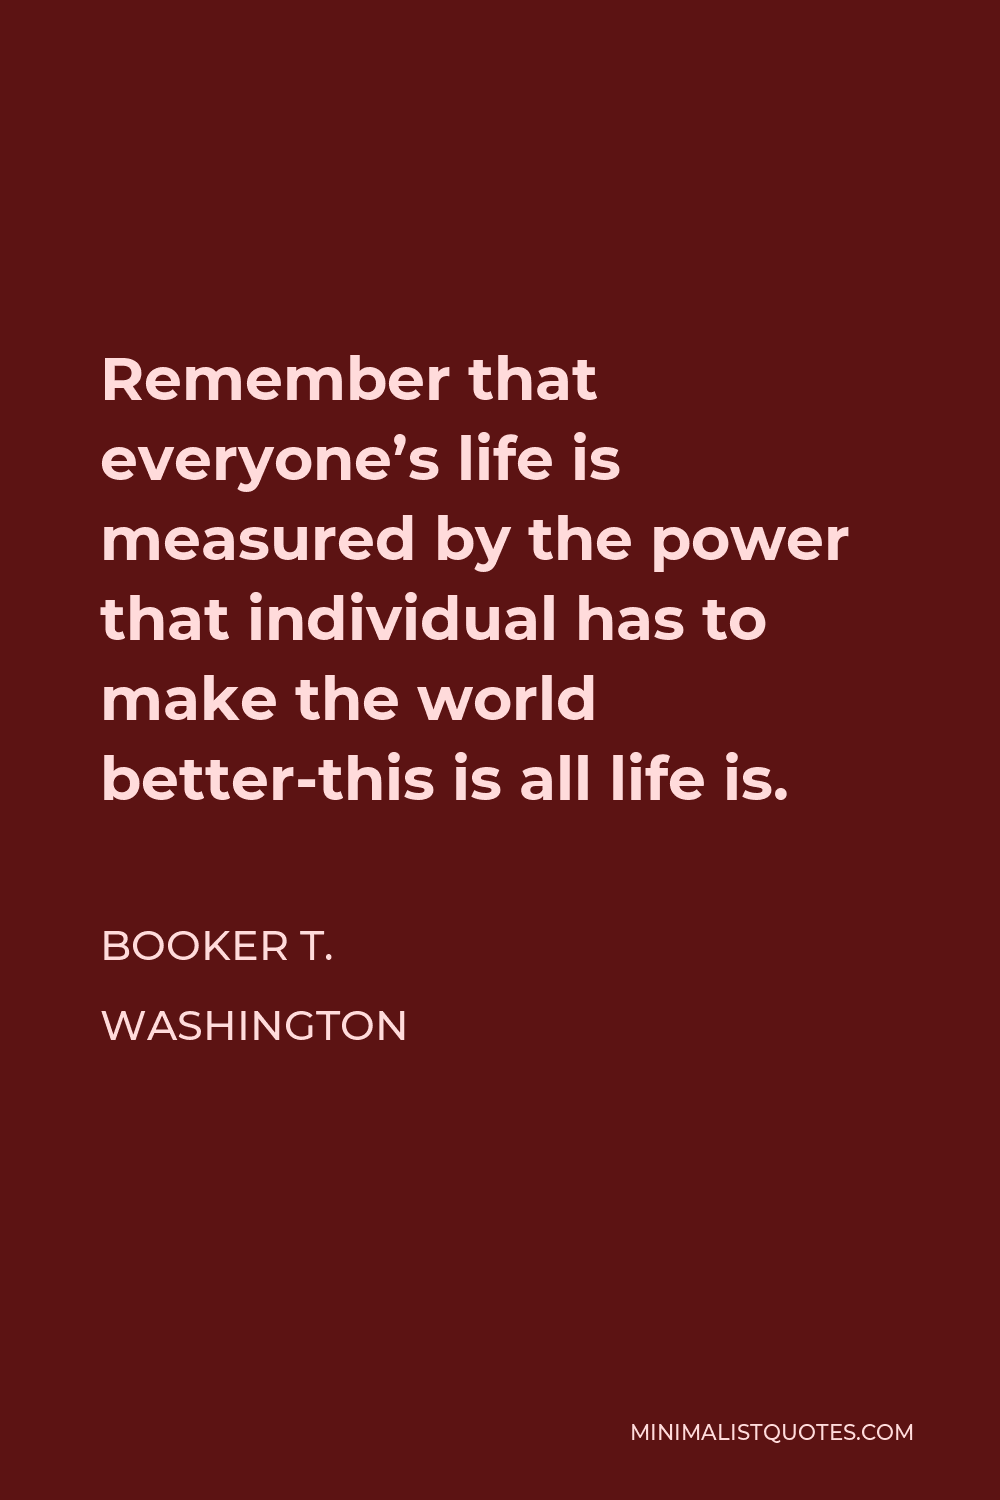 Booker T. Washington Quote - Remember that everyone’s life is measured by the power that individual has to make the world better-this is all life is.